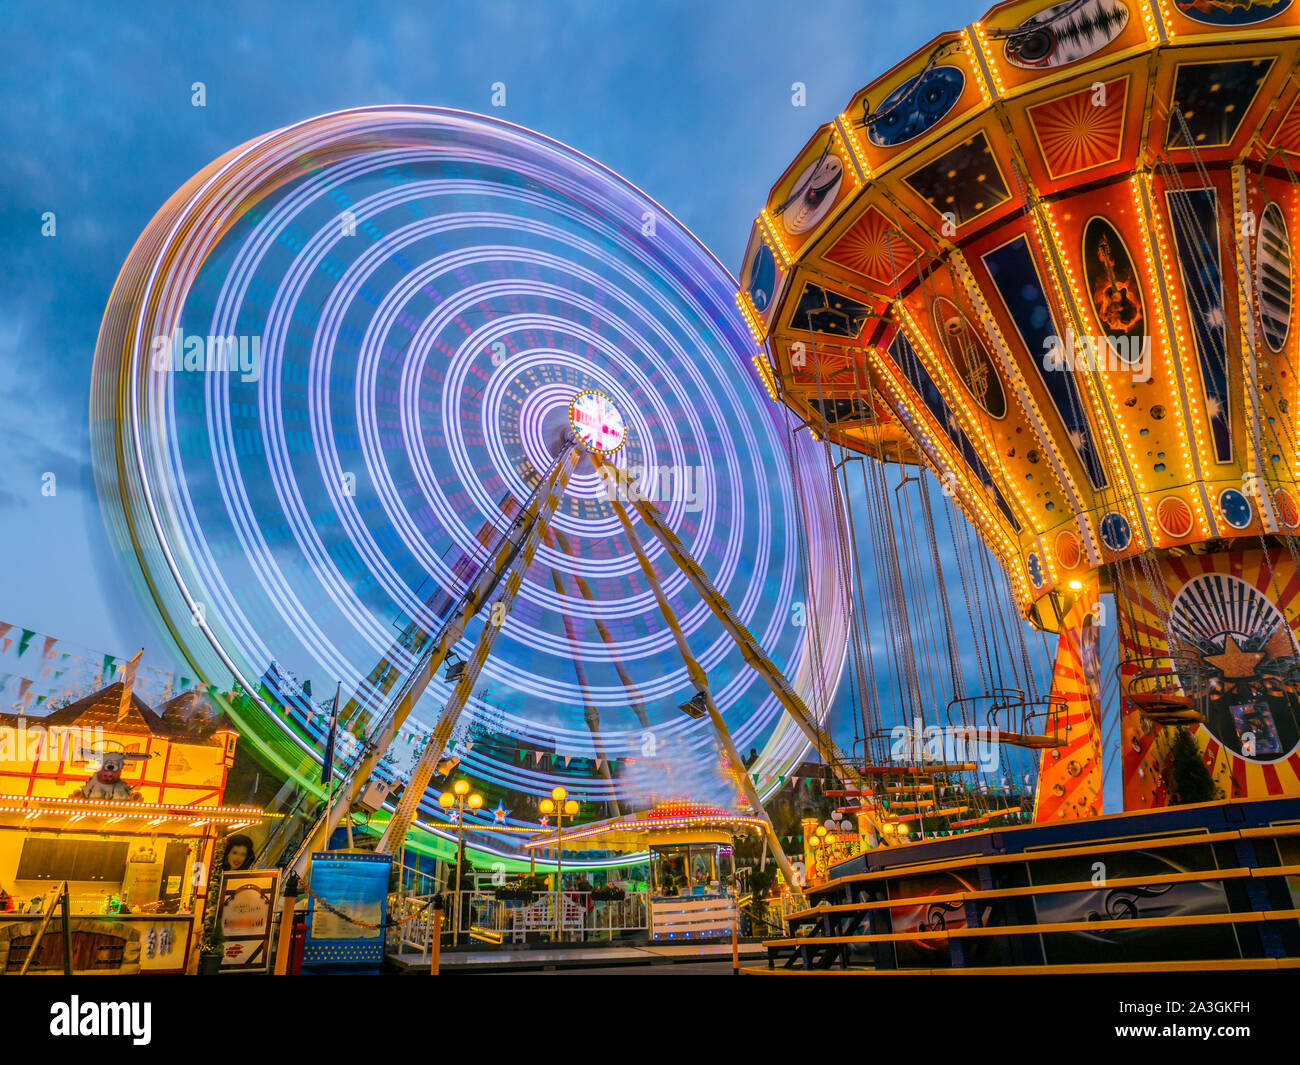 Ferris wheel and chain carousel in the evening at the fair Stock Photo